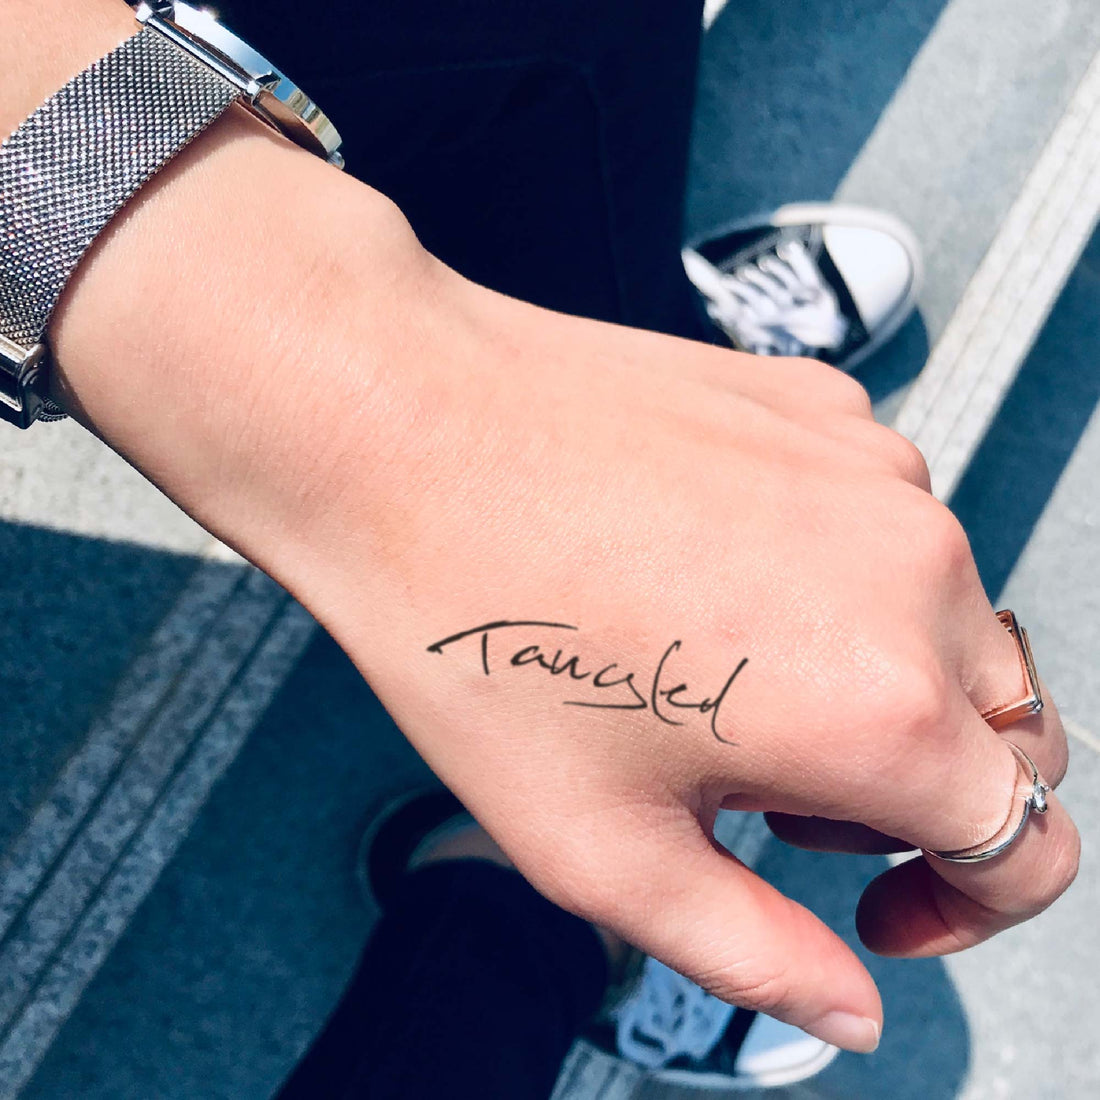 Tangled custom temporary tattoo sticker design idea inspiration meanings removal arm wrist hand words font name signature calligraphy lyrics tour concert outfits merch accessory gift souvenir costumes wear dress up code